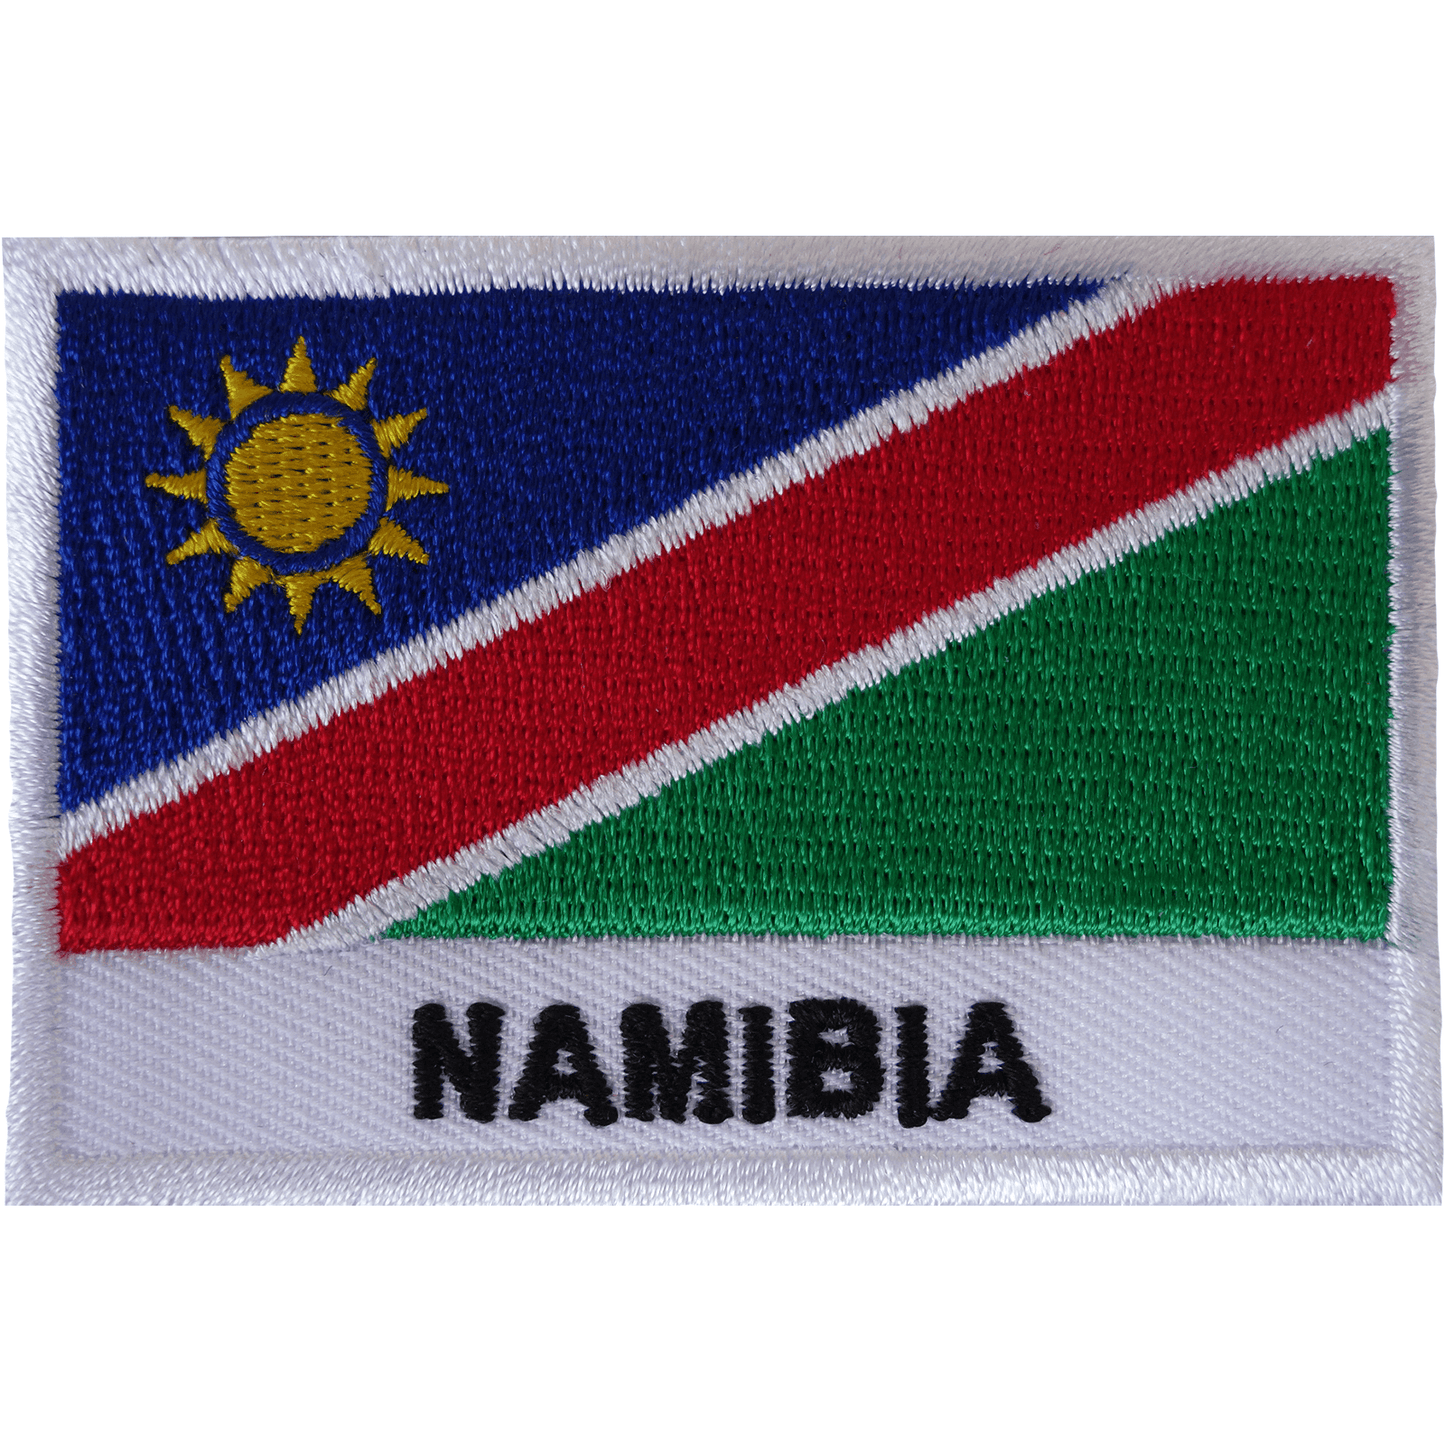 Namibia Flag Iron On Patch Sew On Clothes South Africa African Embroidered Badge